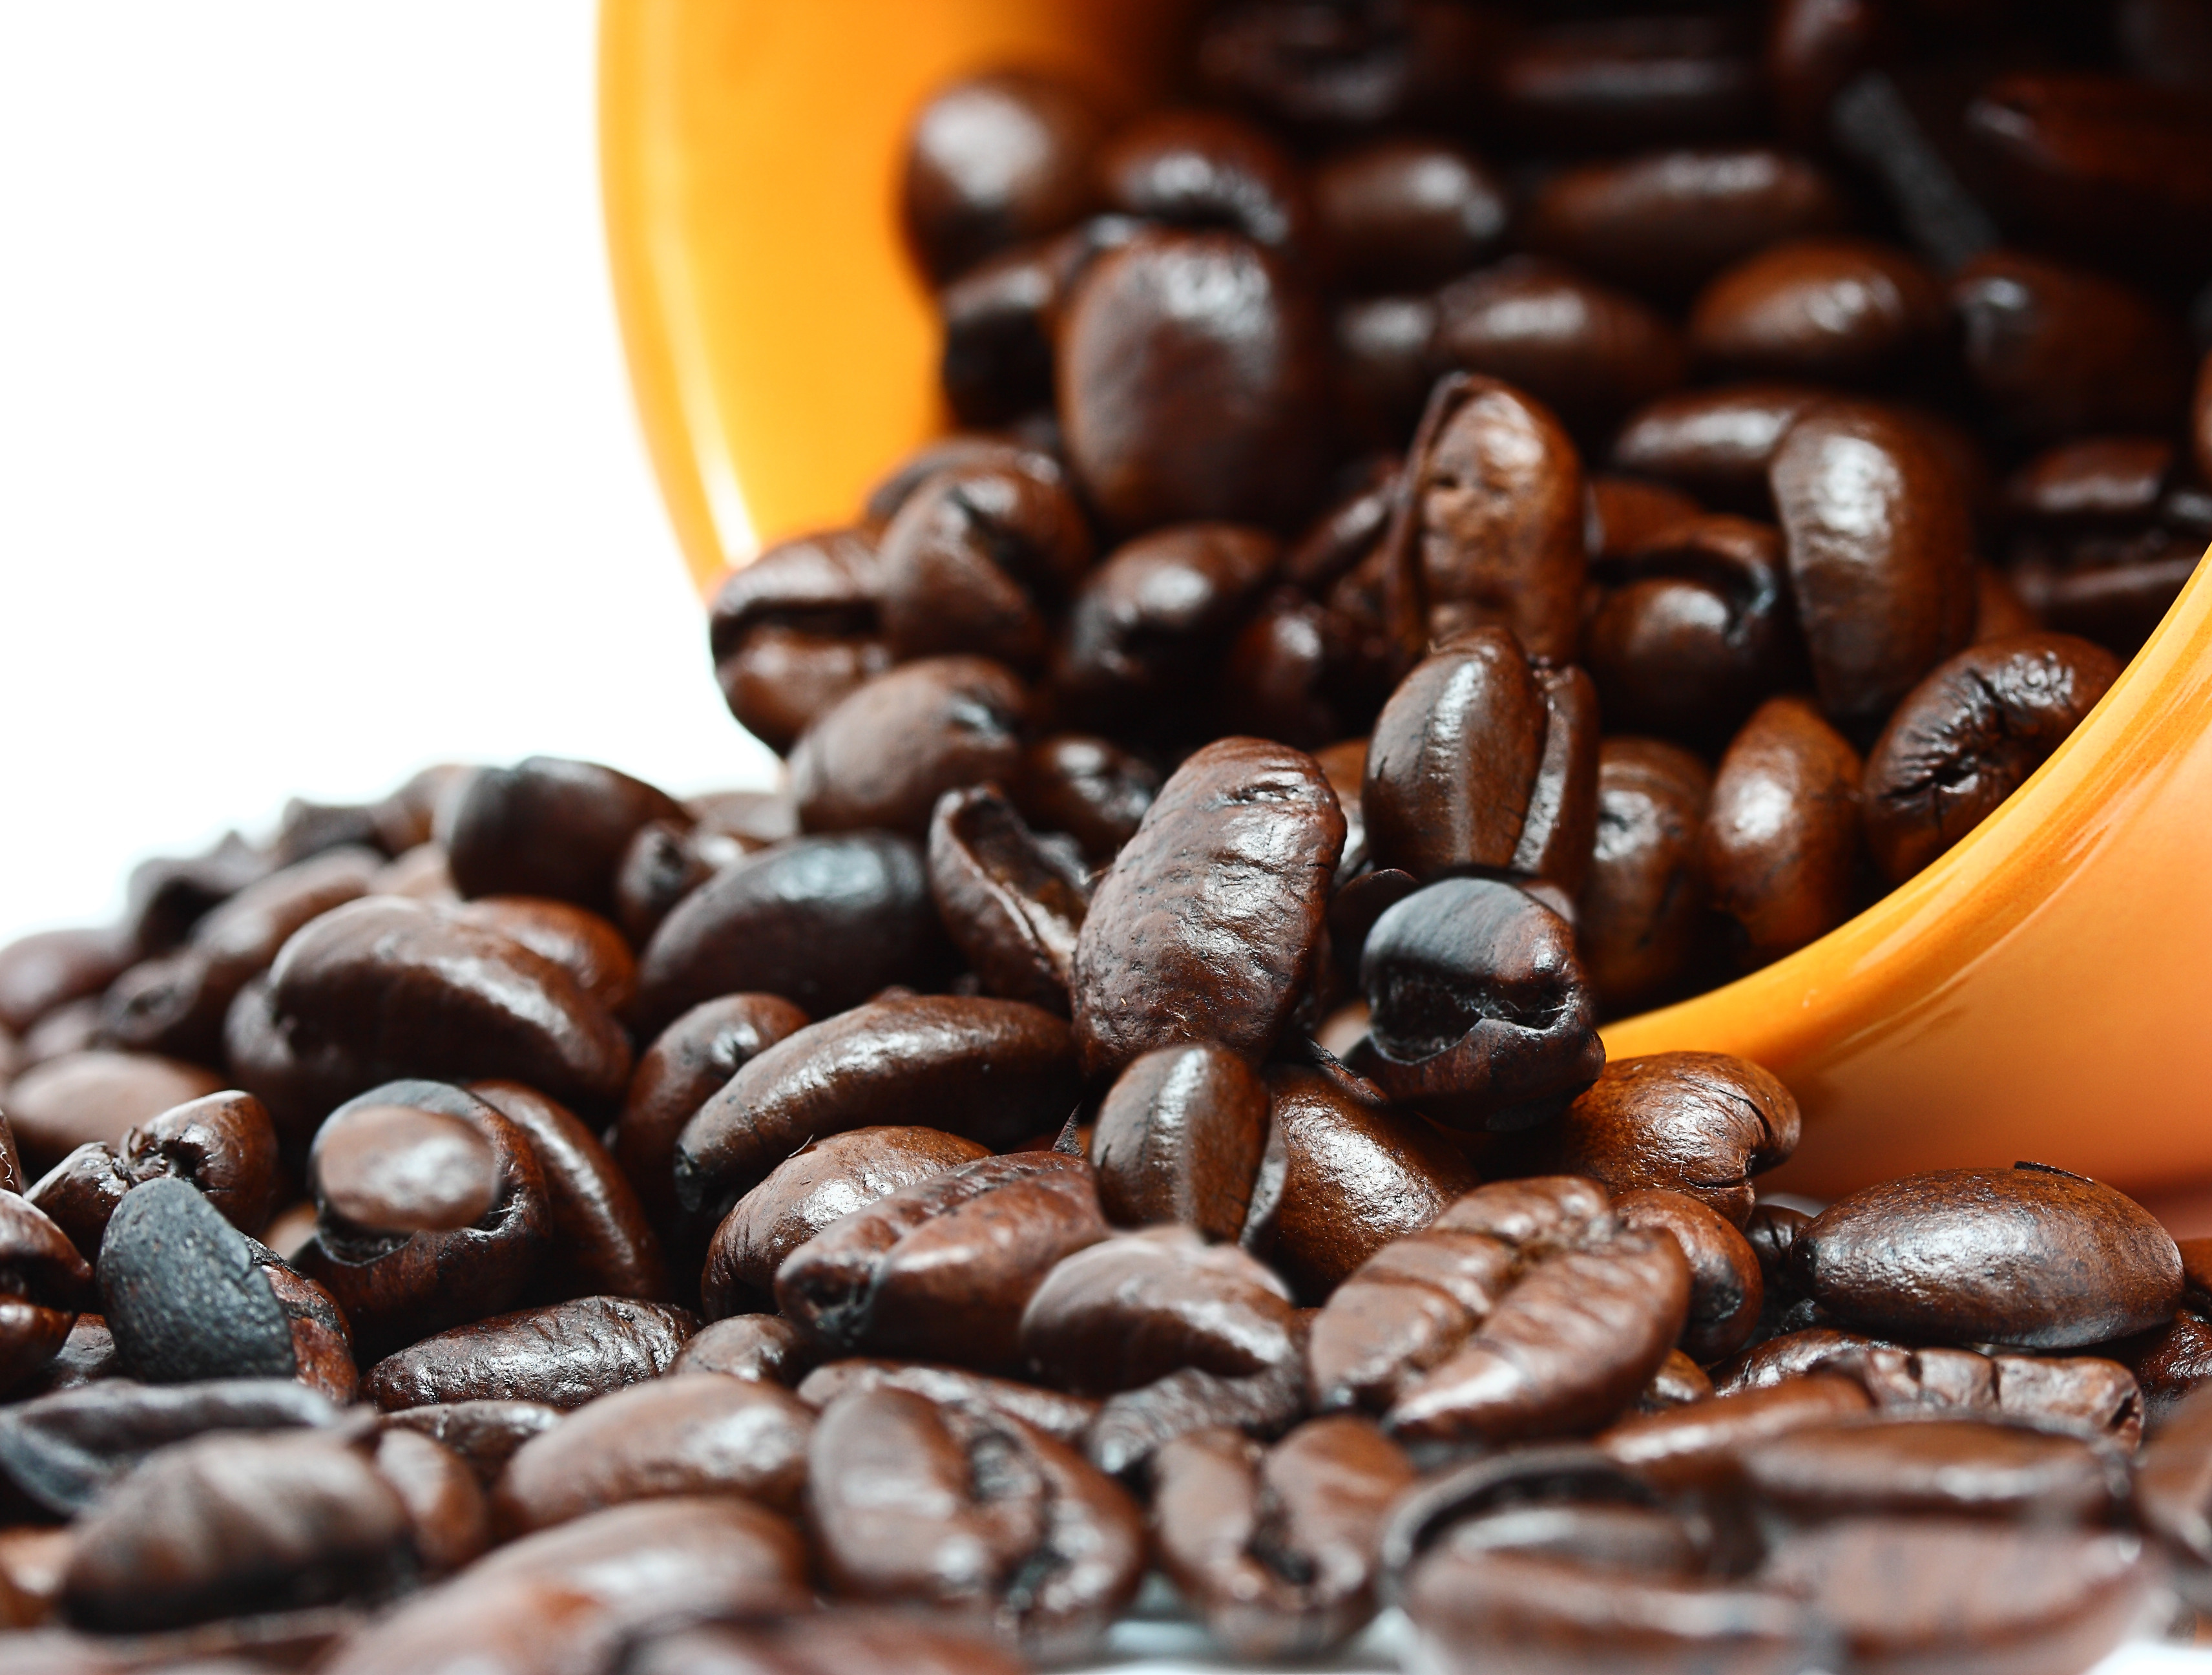 Does Coffee Prevent Cancer?